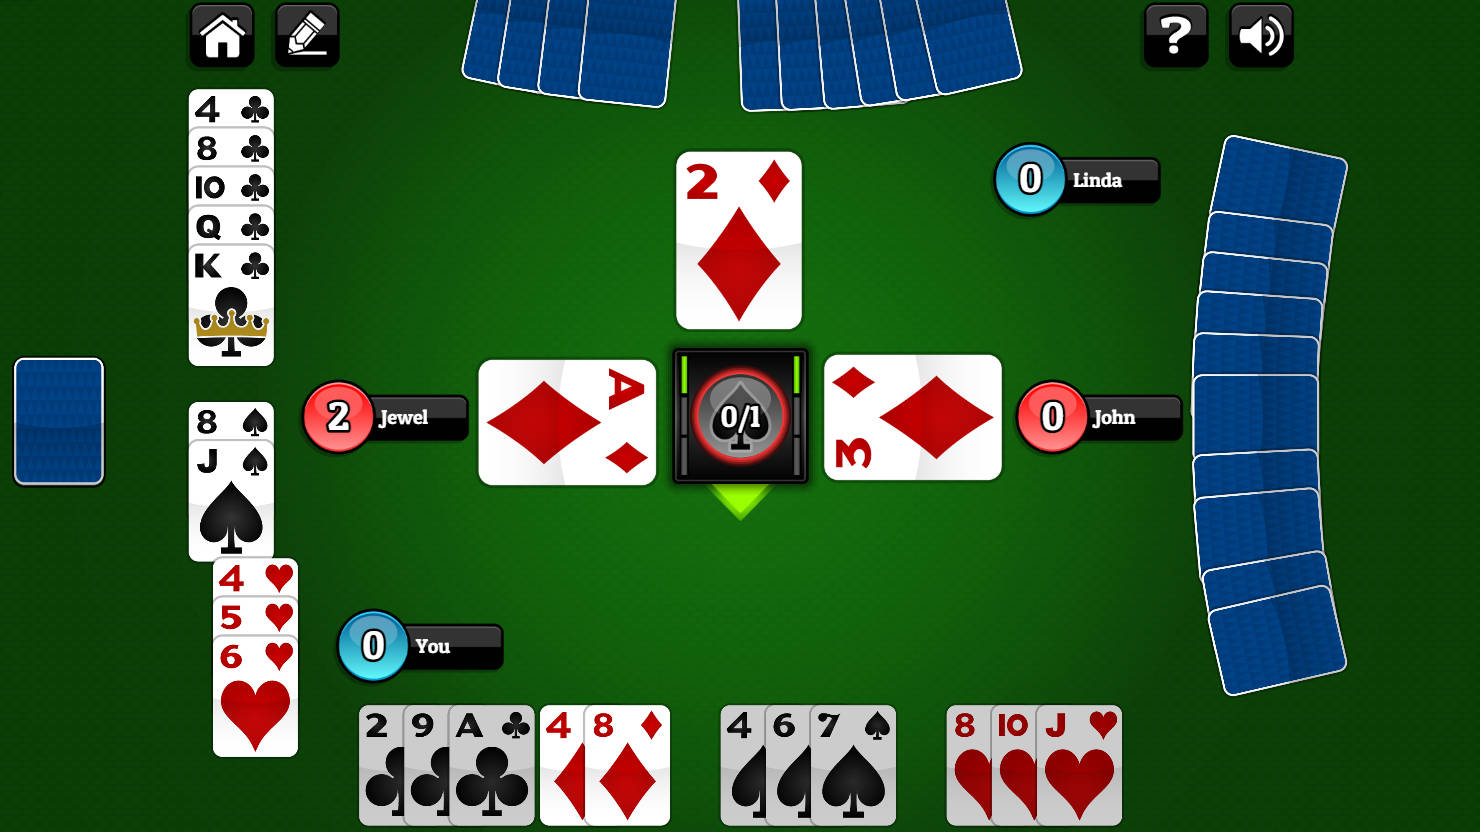 Free card games online - a digital game of bridge being played by four people